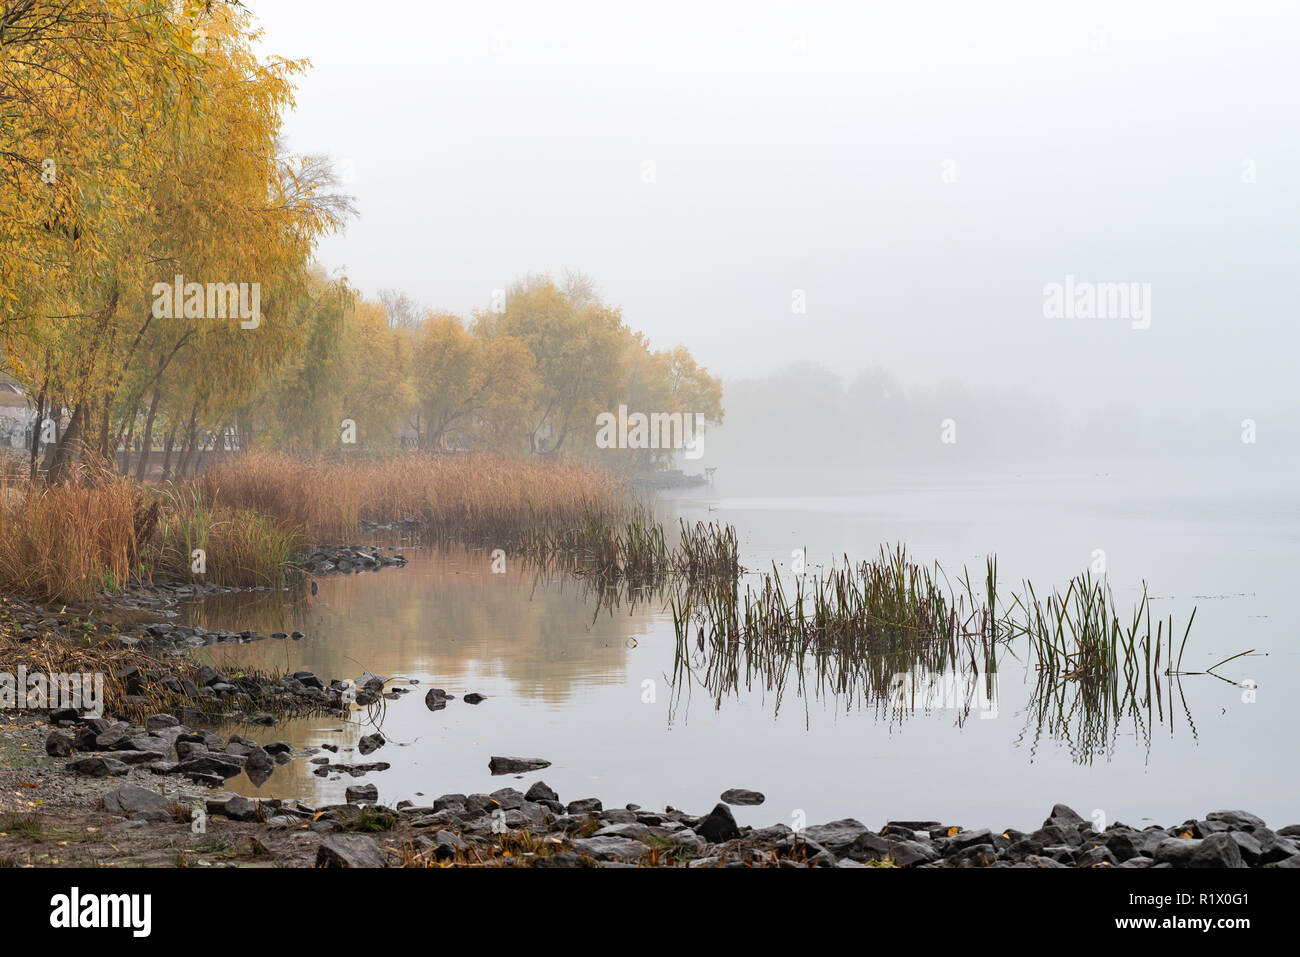 Reeds and trees close to the Dnieper river in Kiev, Ukraine. A soft autumn morning, mist over the cold and calm water. The landscape disappears in the Stock Photo